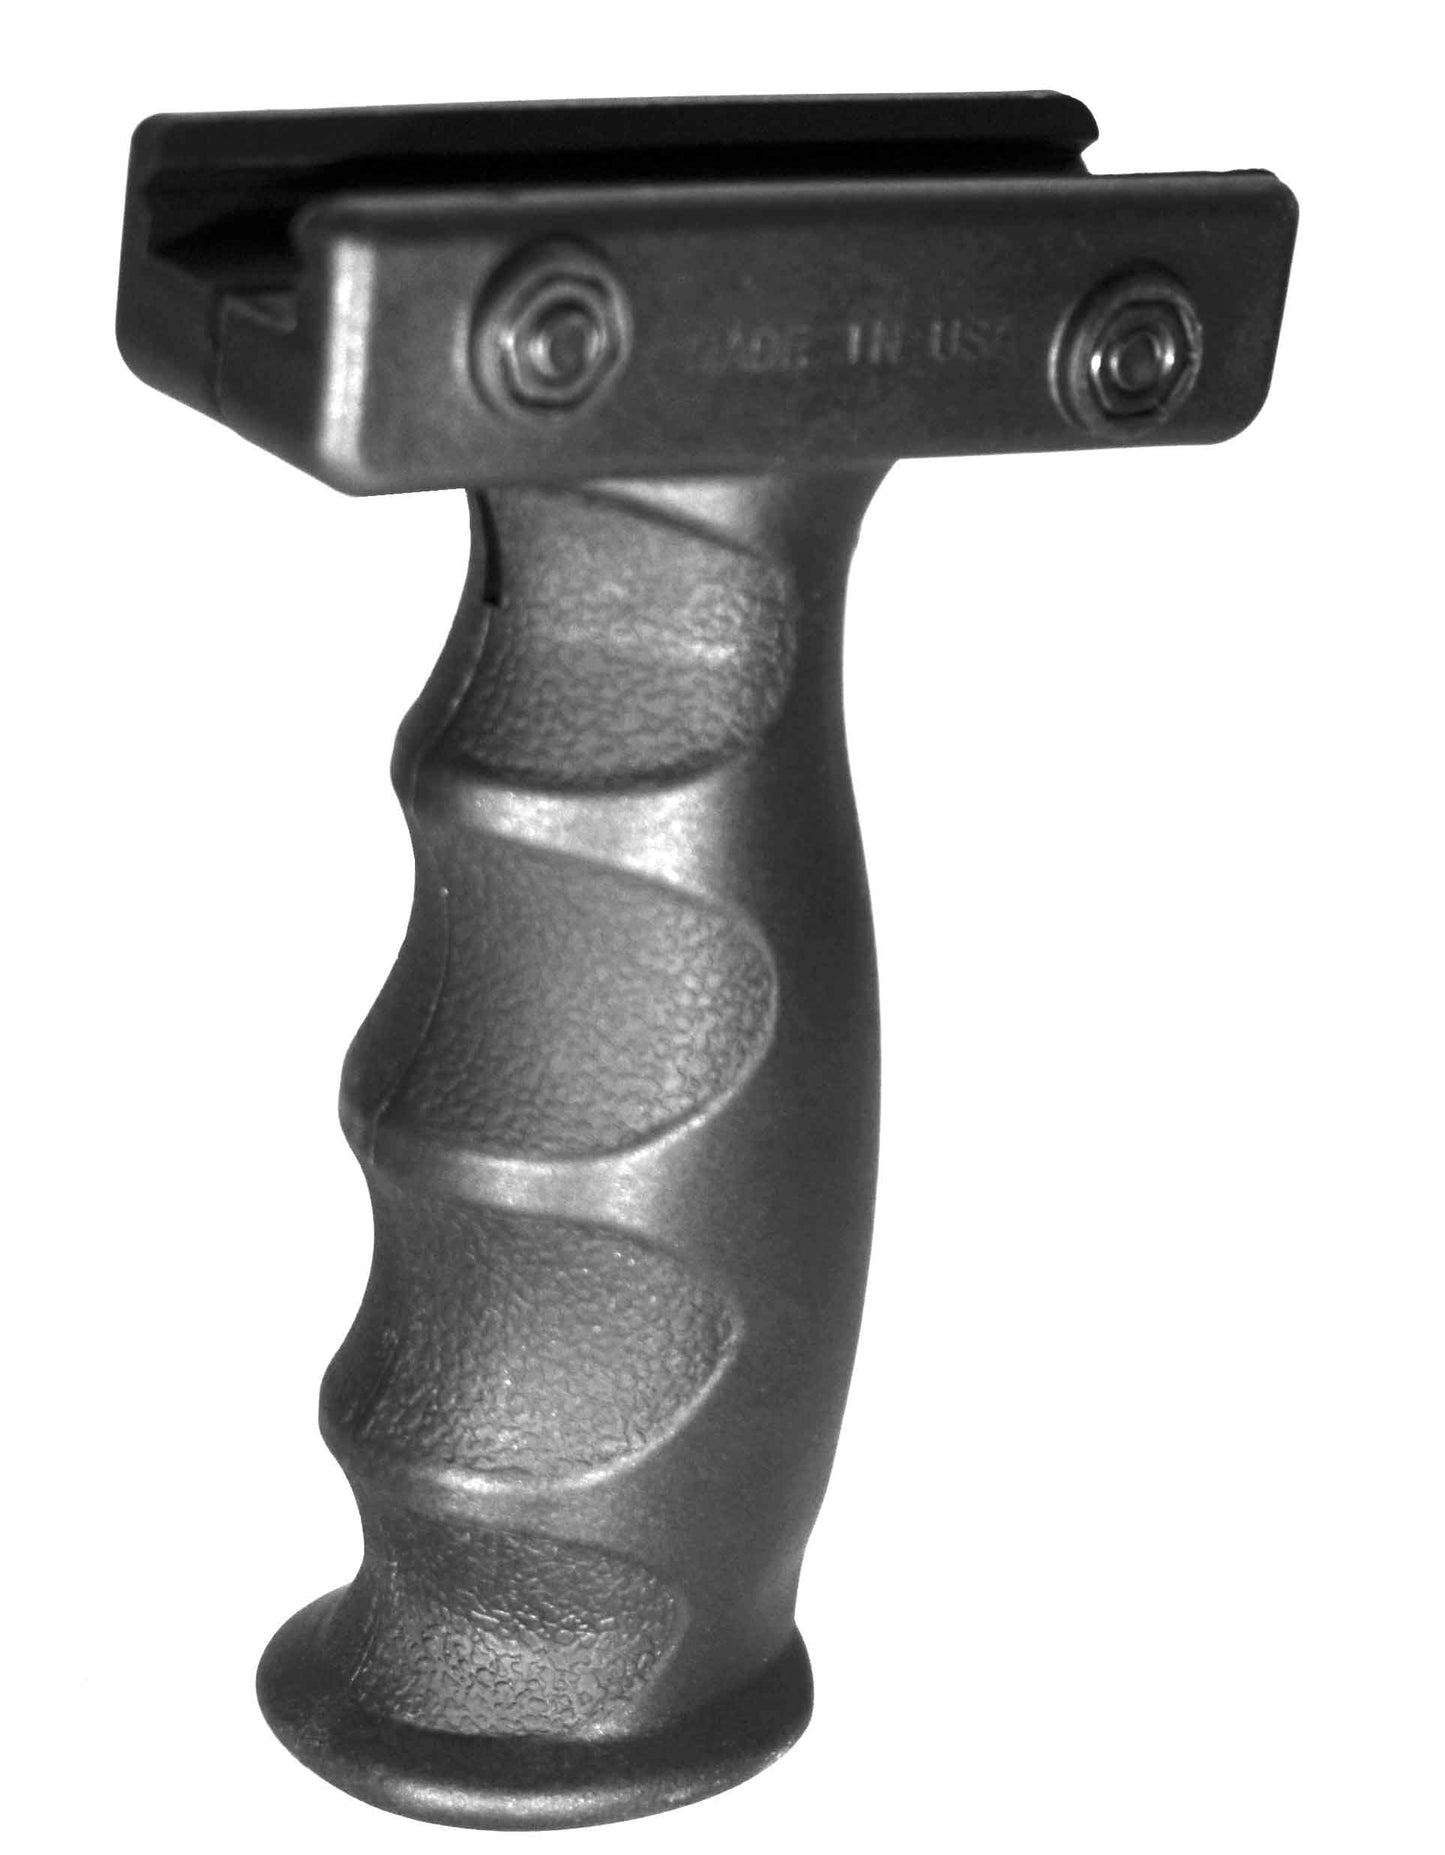 picatinny style grip black for rifles.